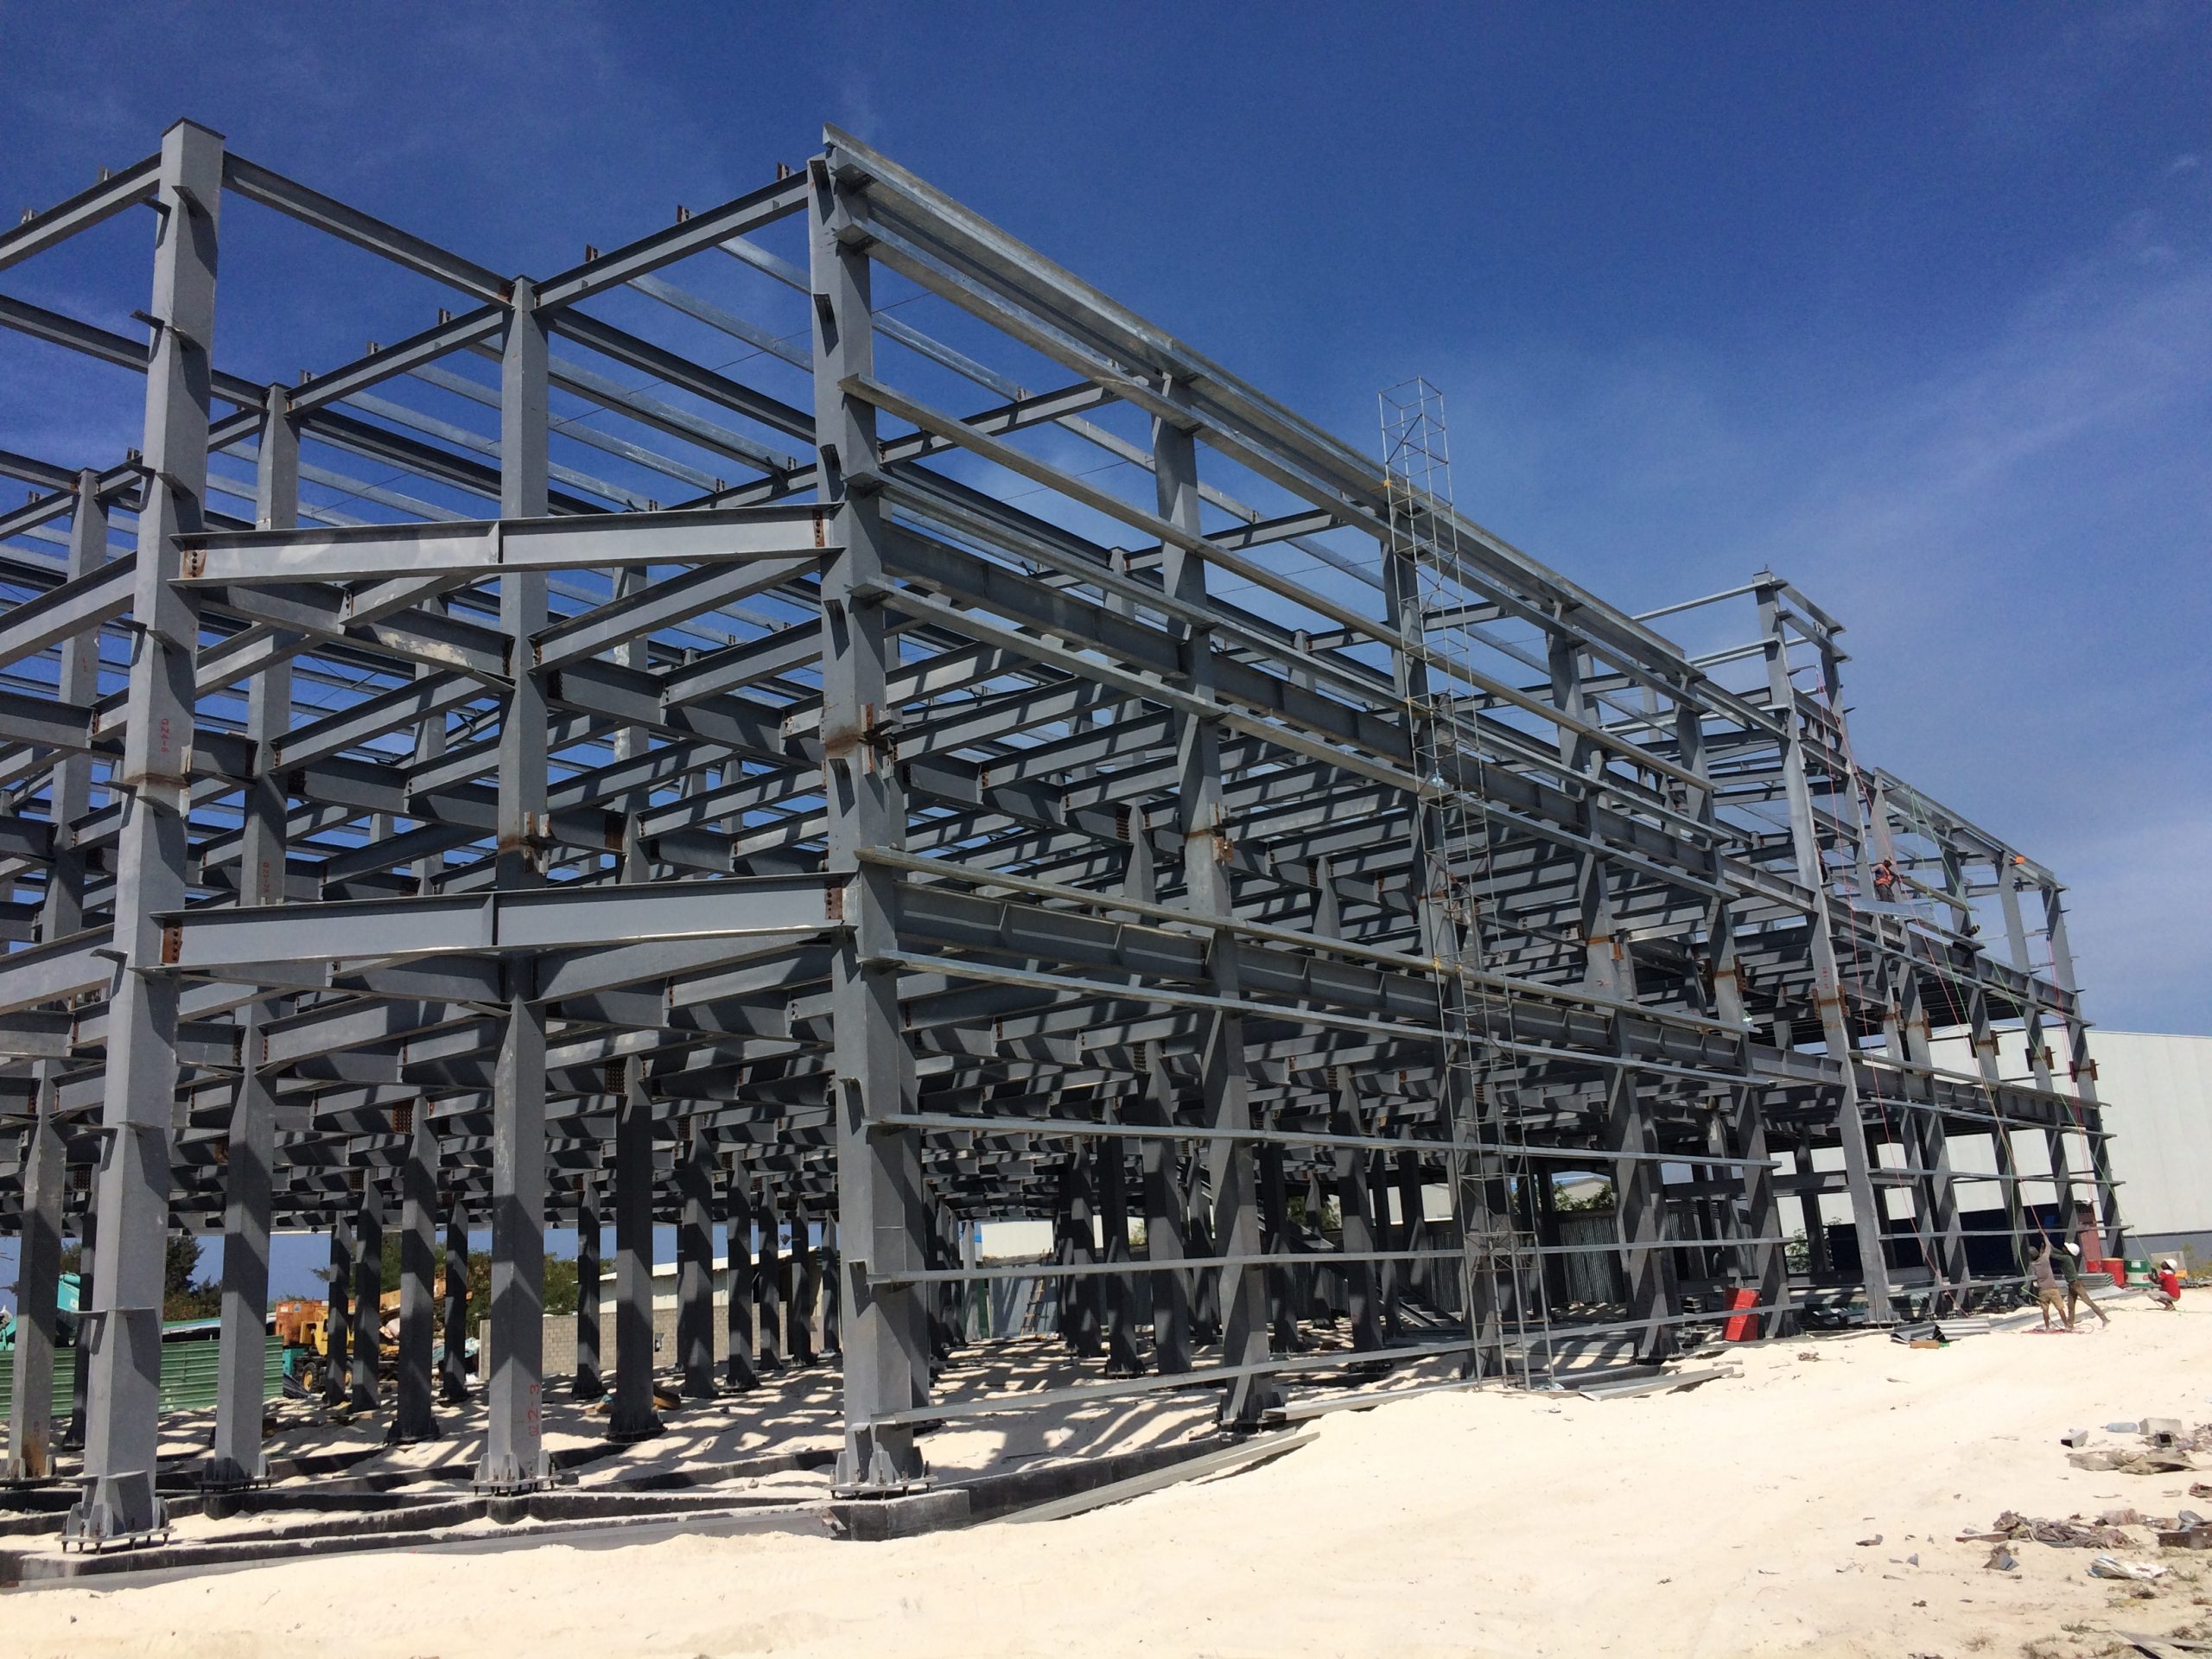 Local council greenlights development approval for massive new steel structure logistics warehouse billed as the largest such facility ever constructed in the region, promising hundreds of new jobs.